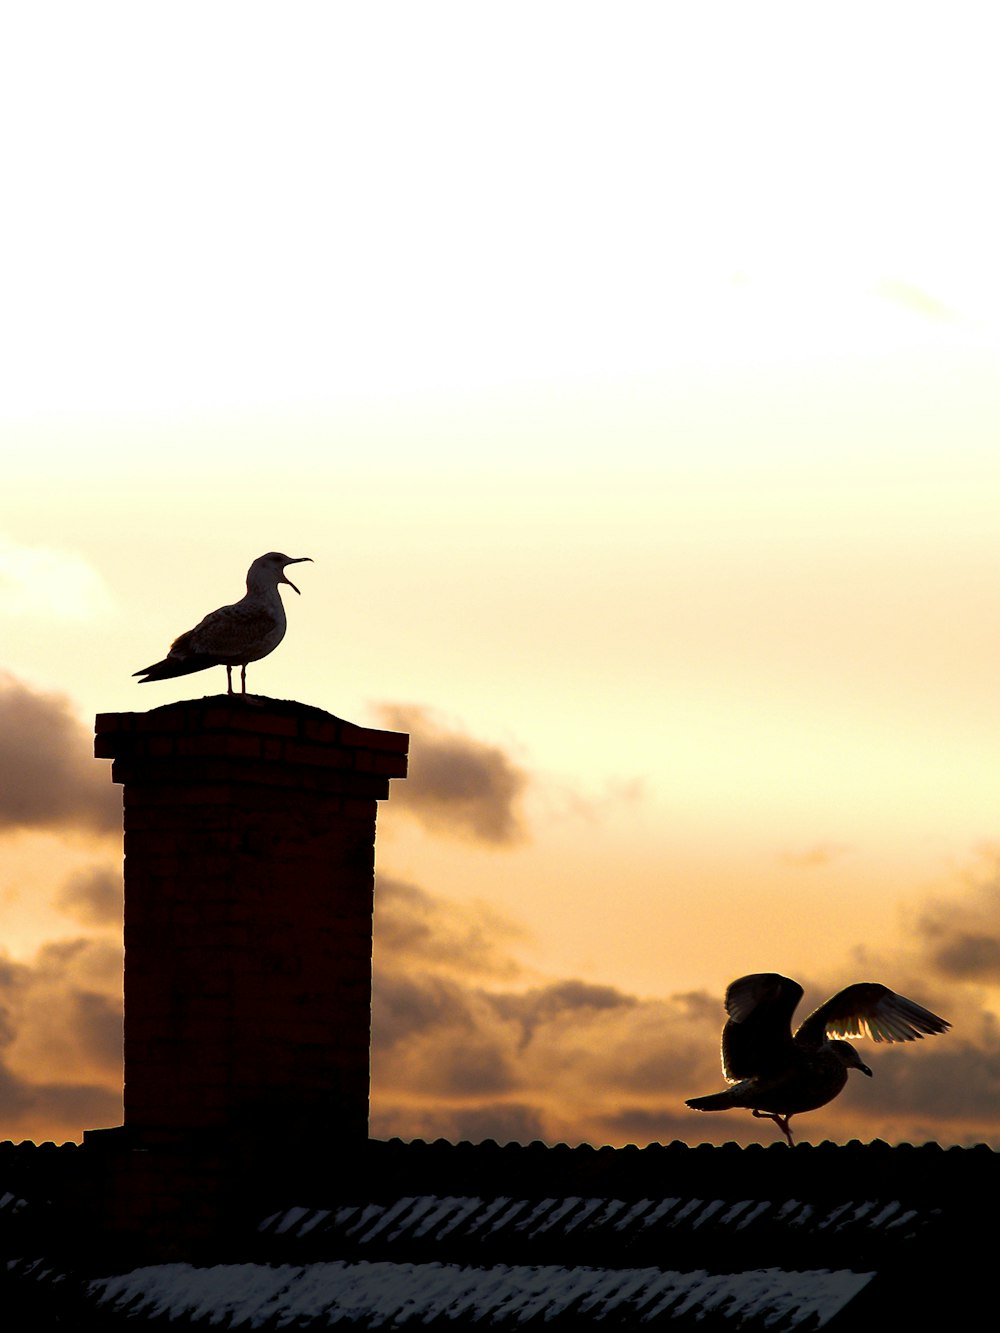 two birds on chimney and rooftop during golden hour